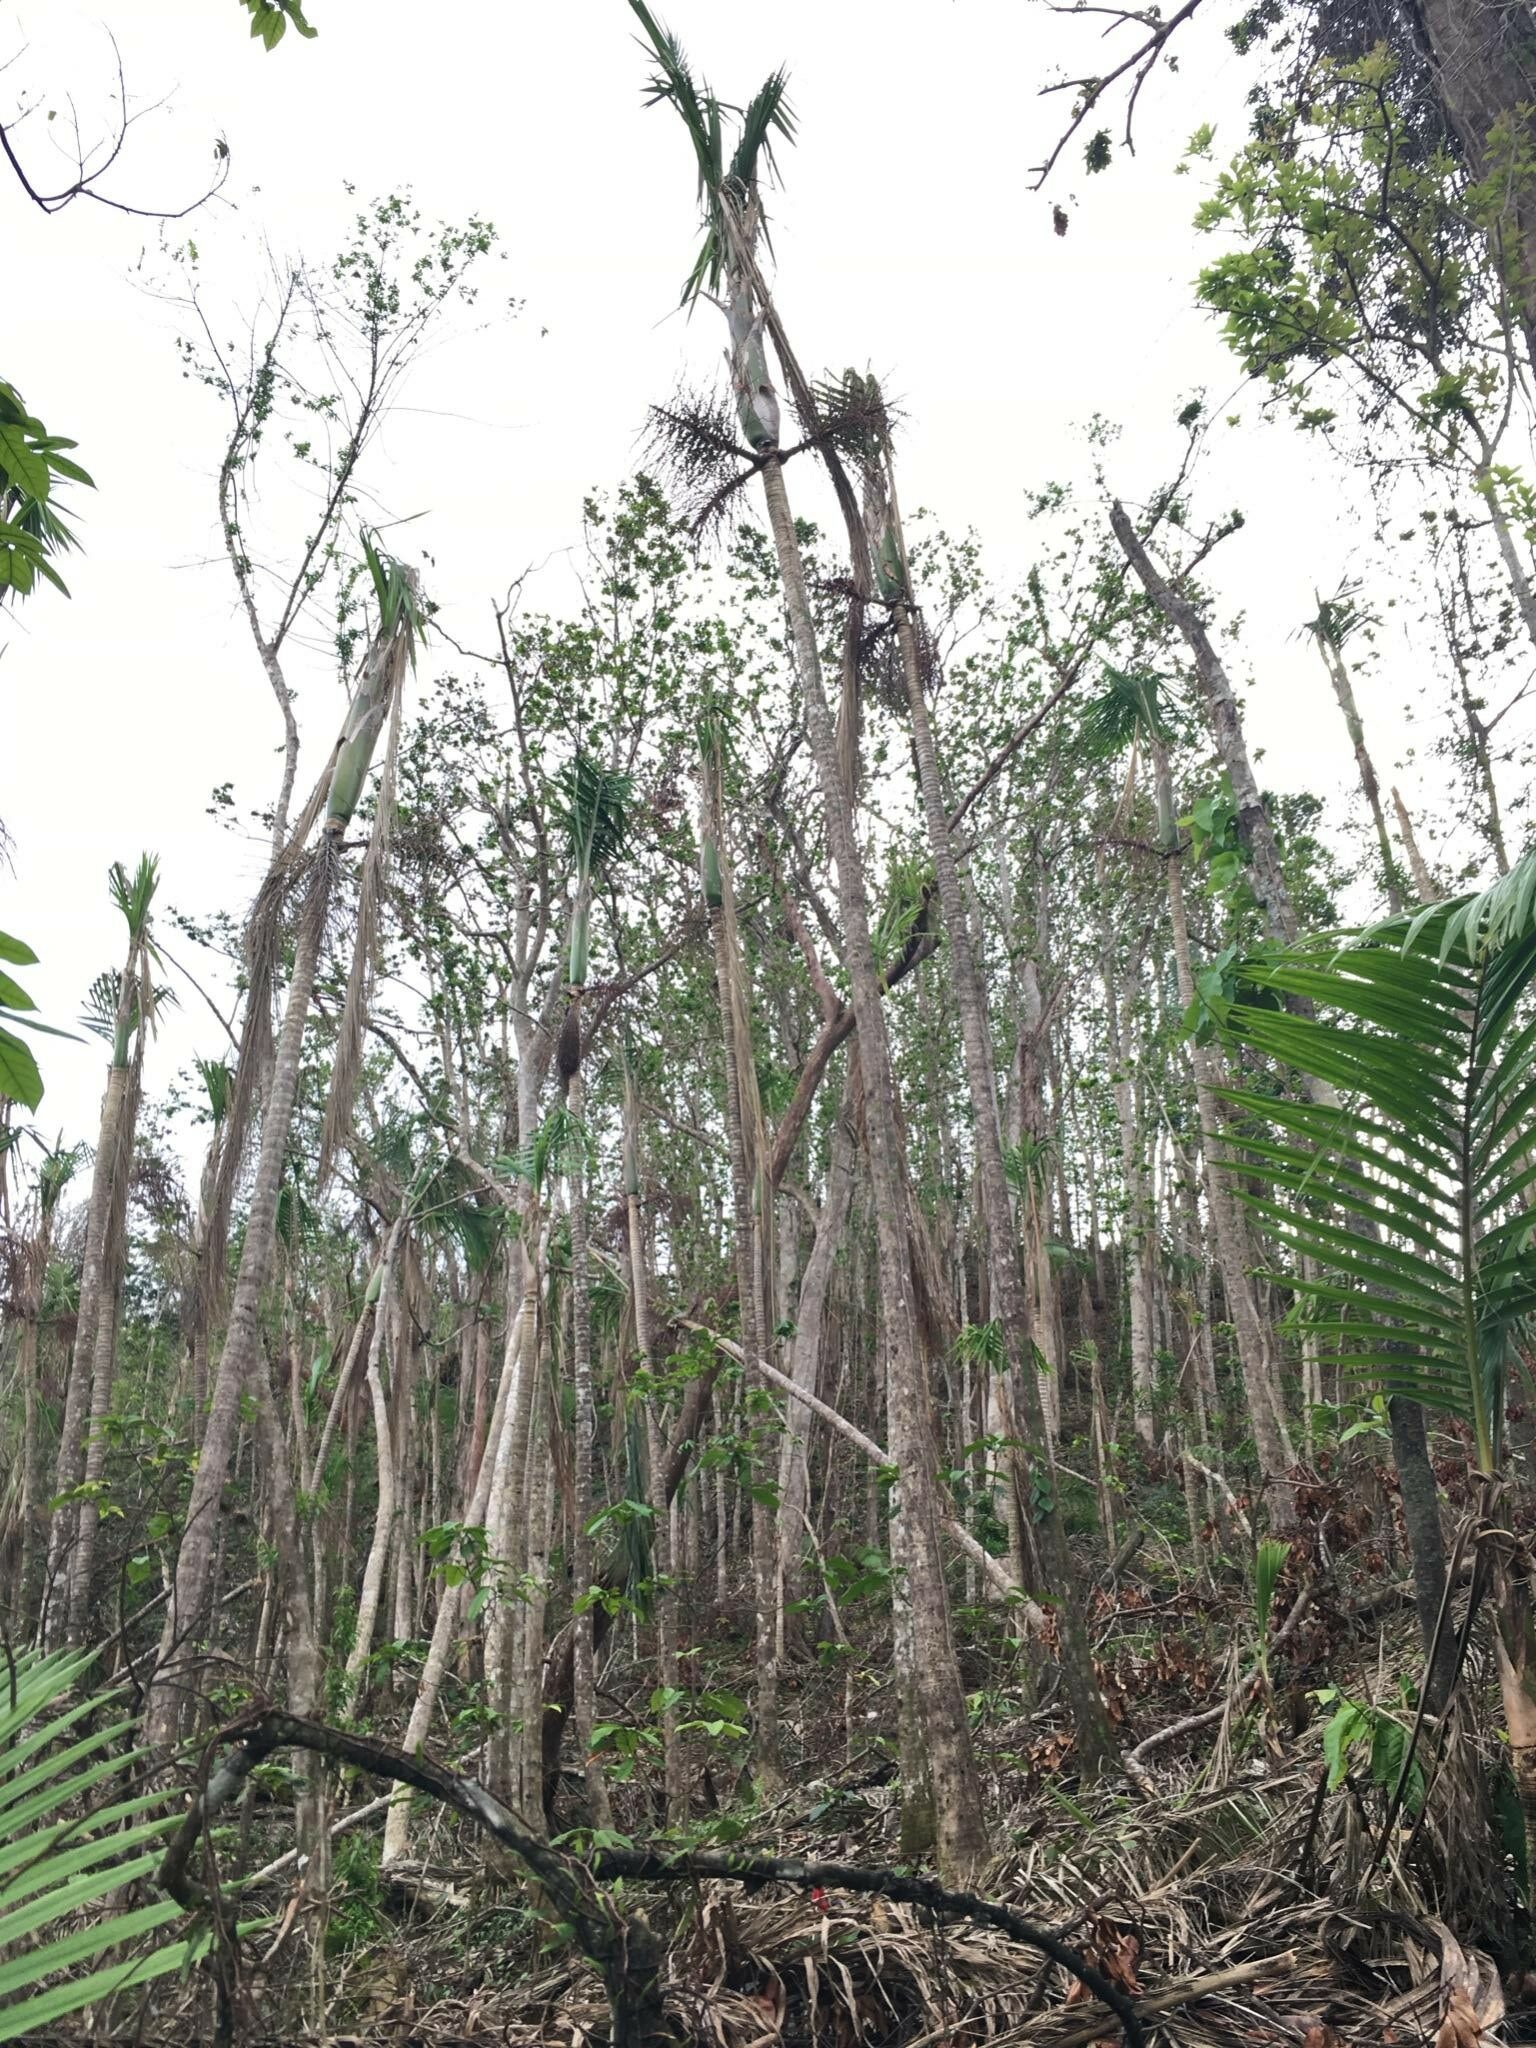 Forest canopy damage in Puerto Rico following Hurricane Maria in 2017.